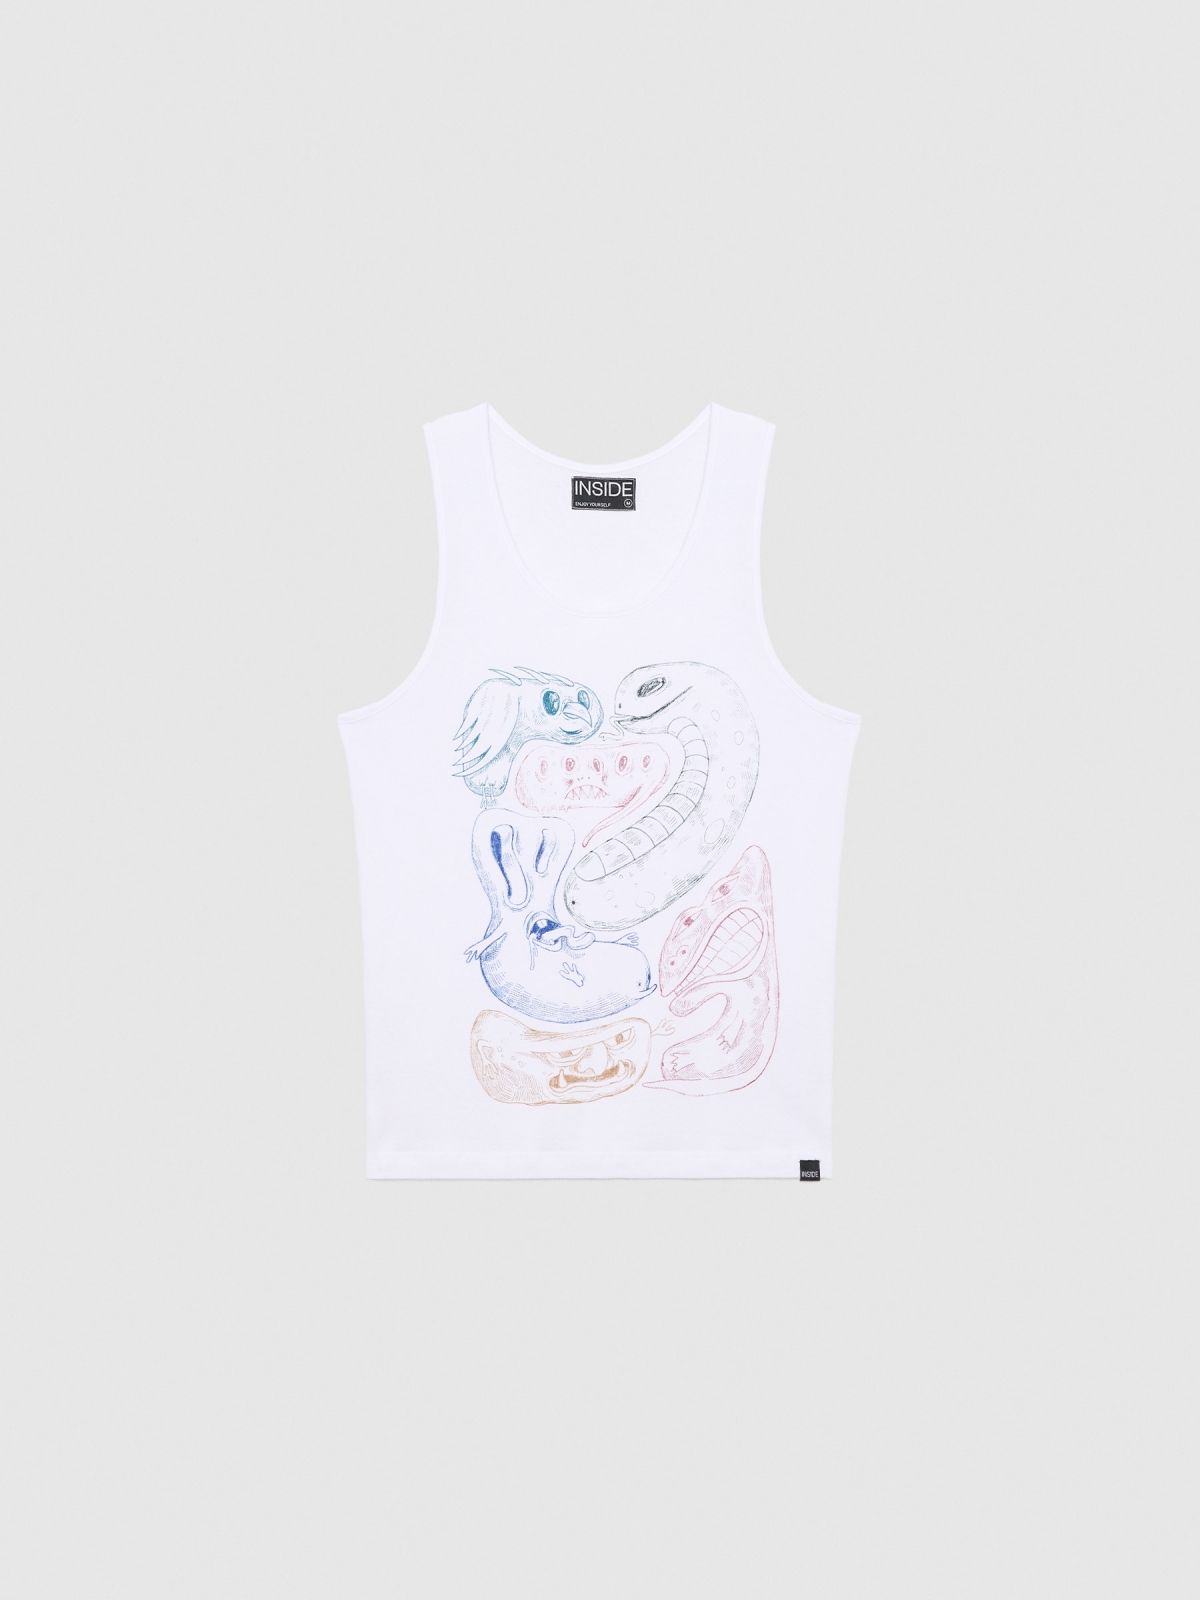  Monsters tank top white